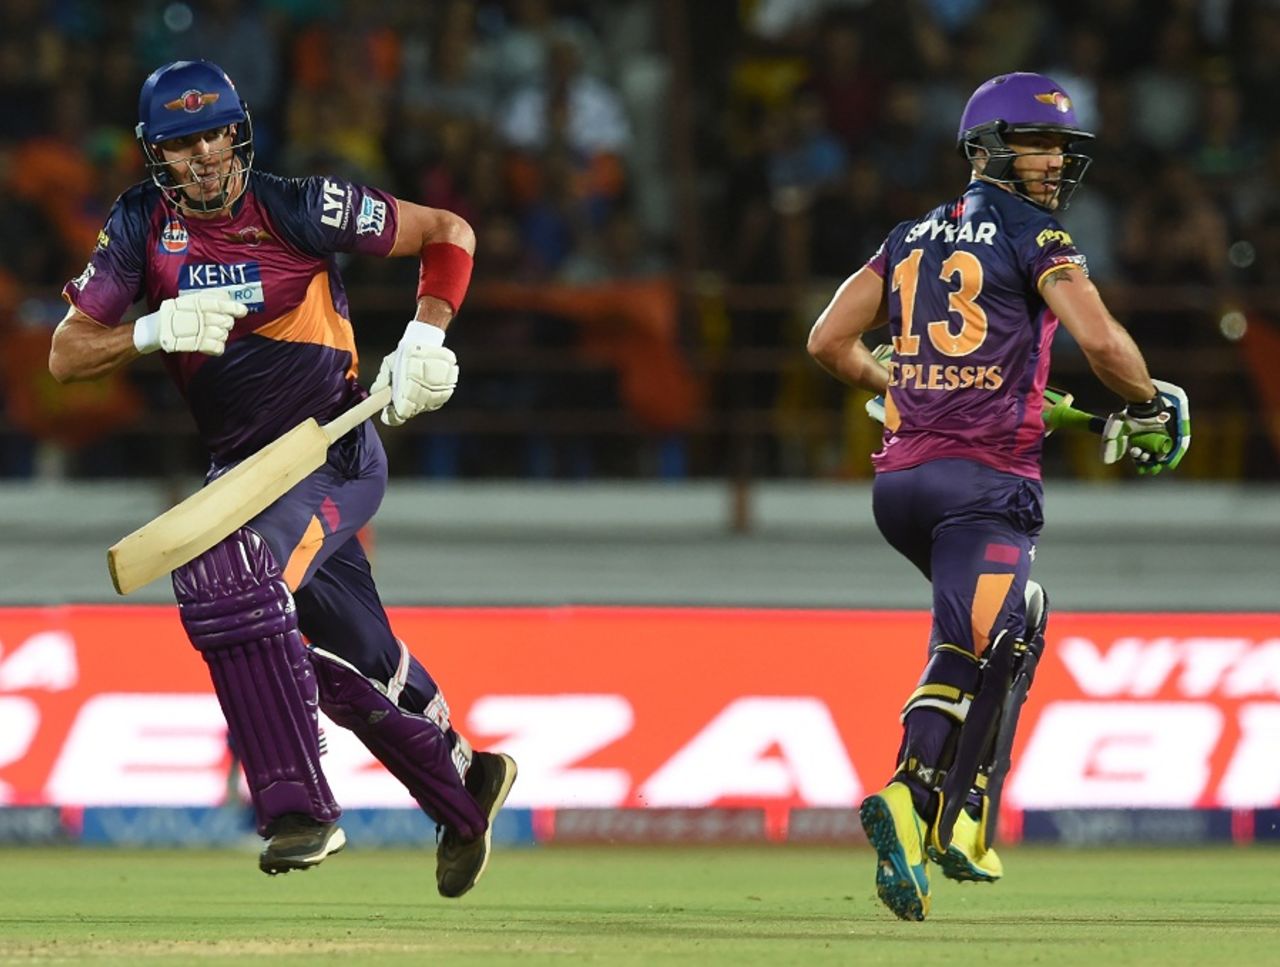 Kevin Pietersen and Faf du Plessis complete a run during their attacking partnership, Gujarat Lions v Rising Pune Supergiants, IPL 2016, Rajkot, April 14, 2016